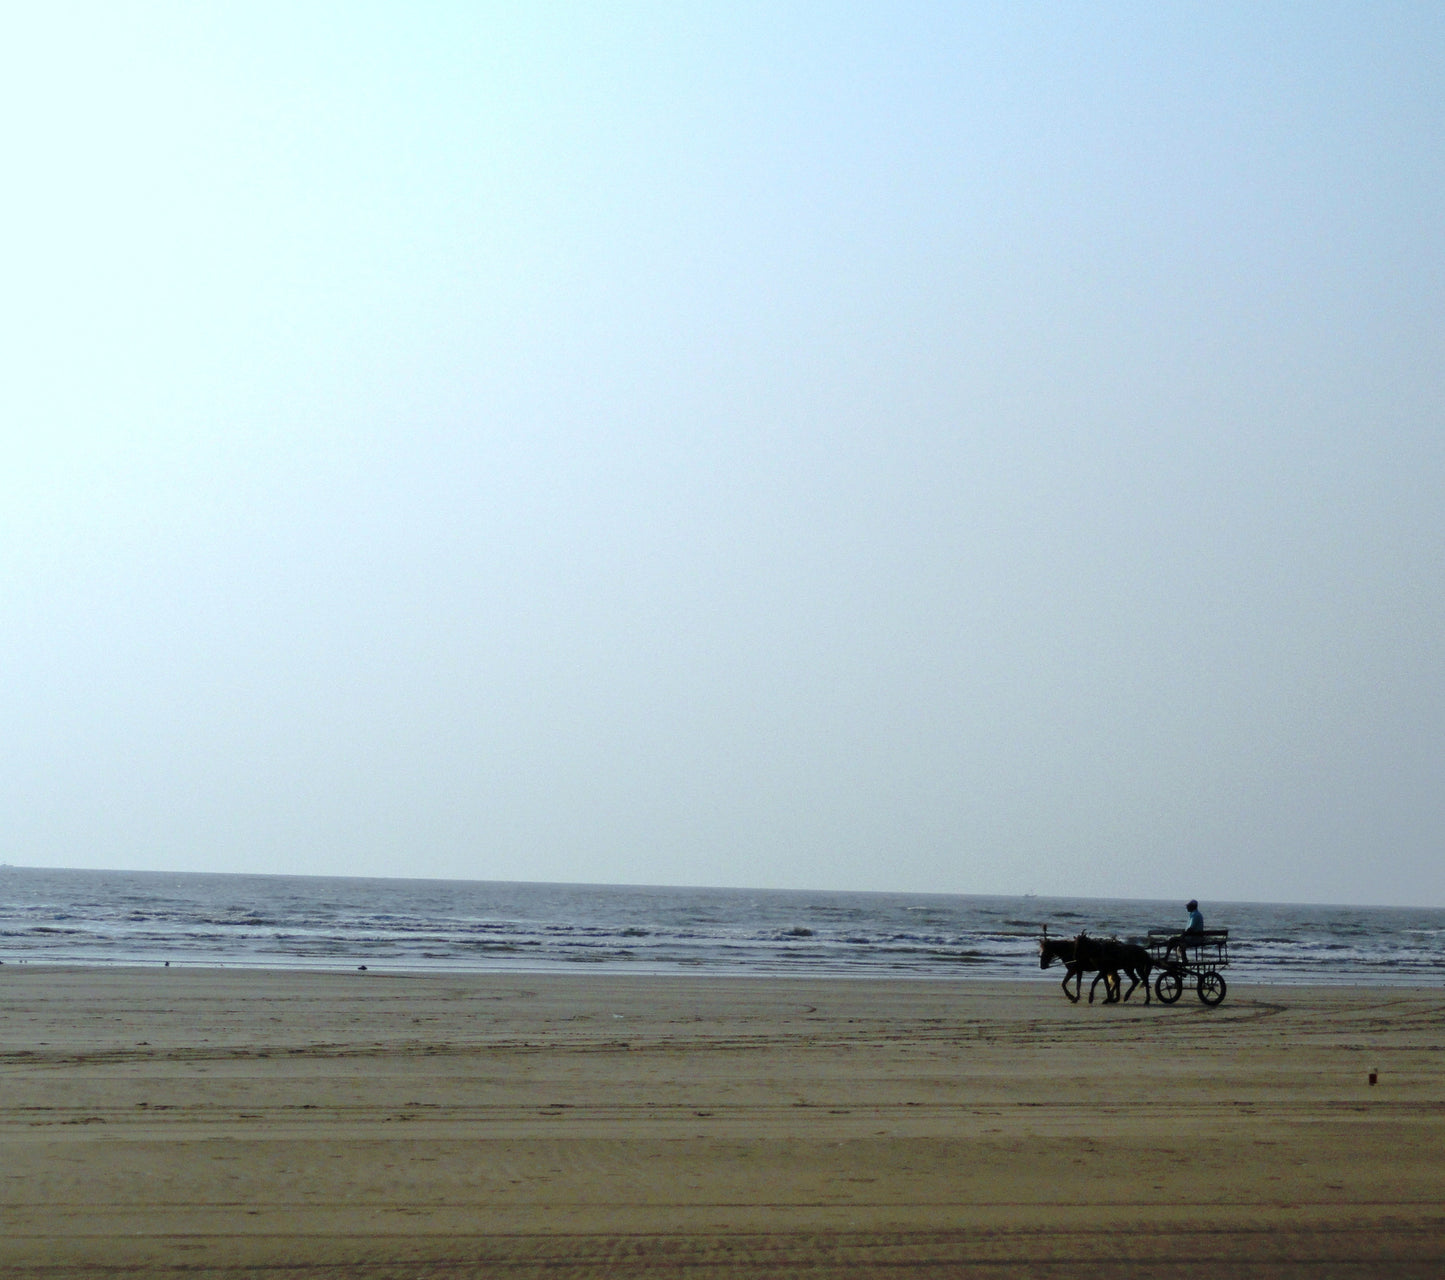 Nagaon Beach (Alibaug) : Stay in standard room with all meals (Veg/Non-Veg), Swimming Pool & MORE!